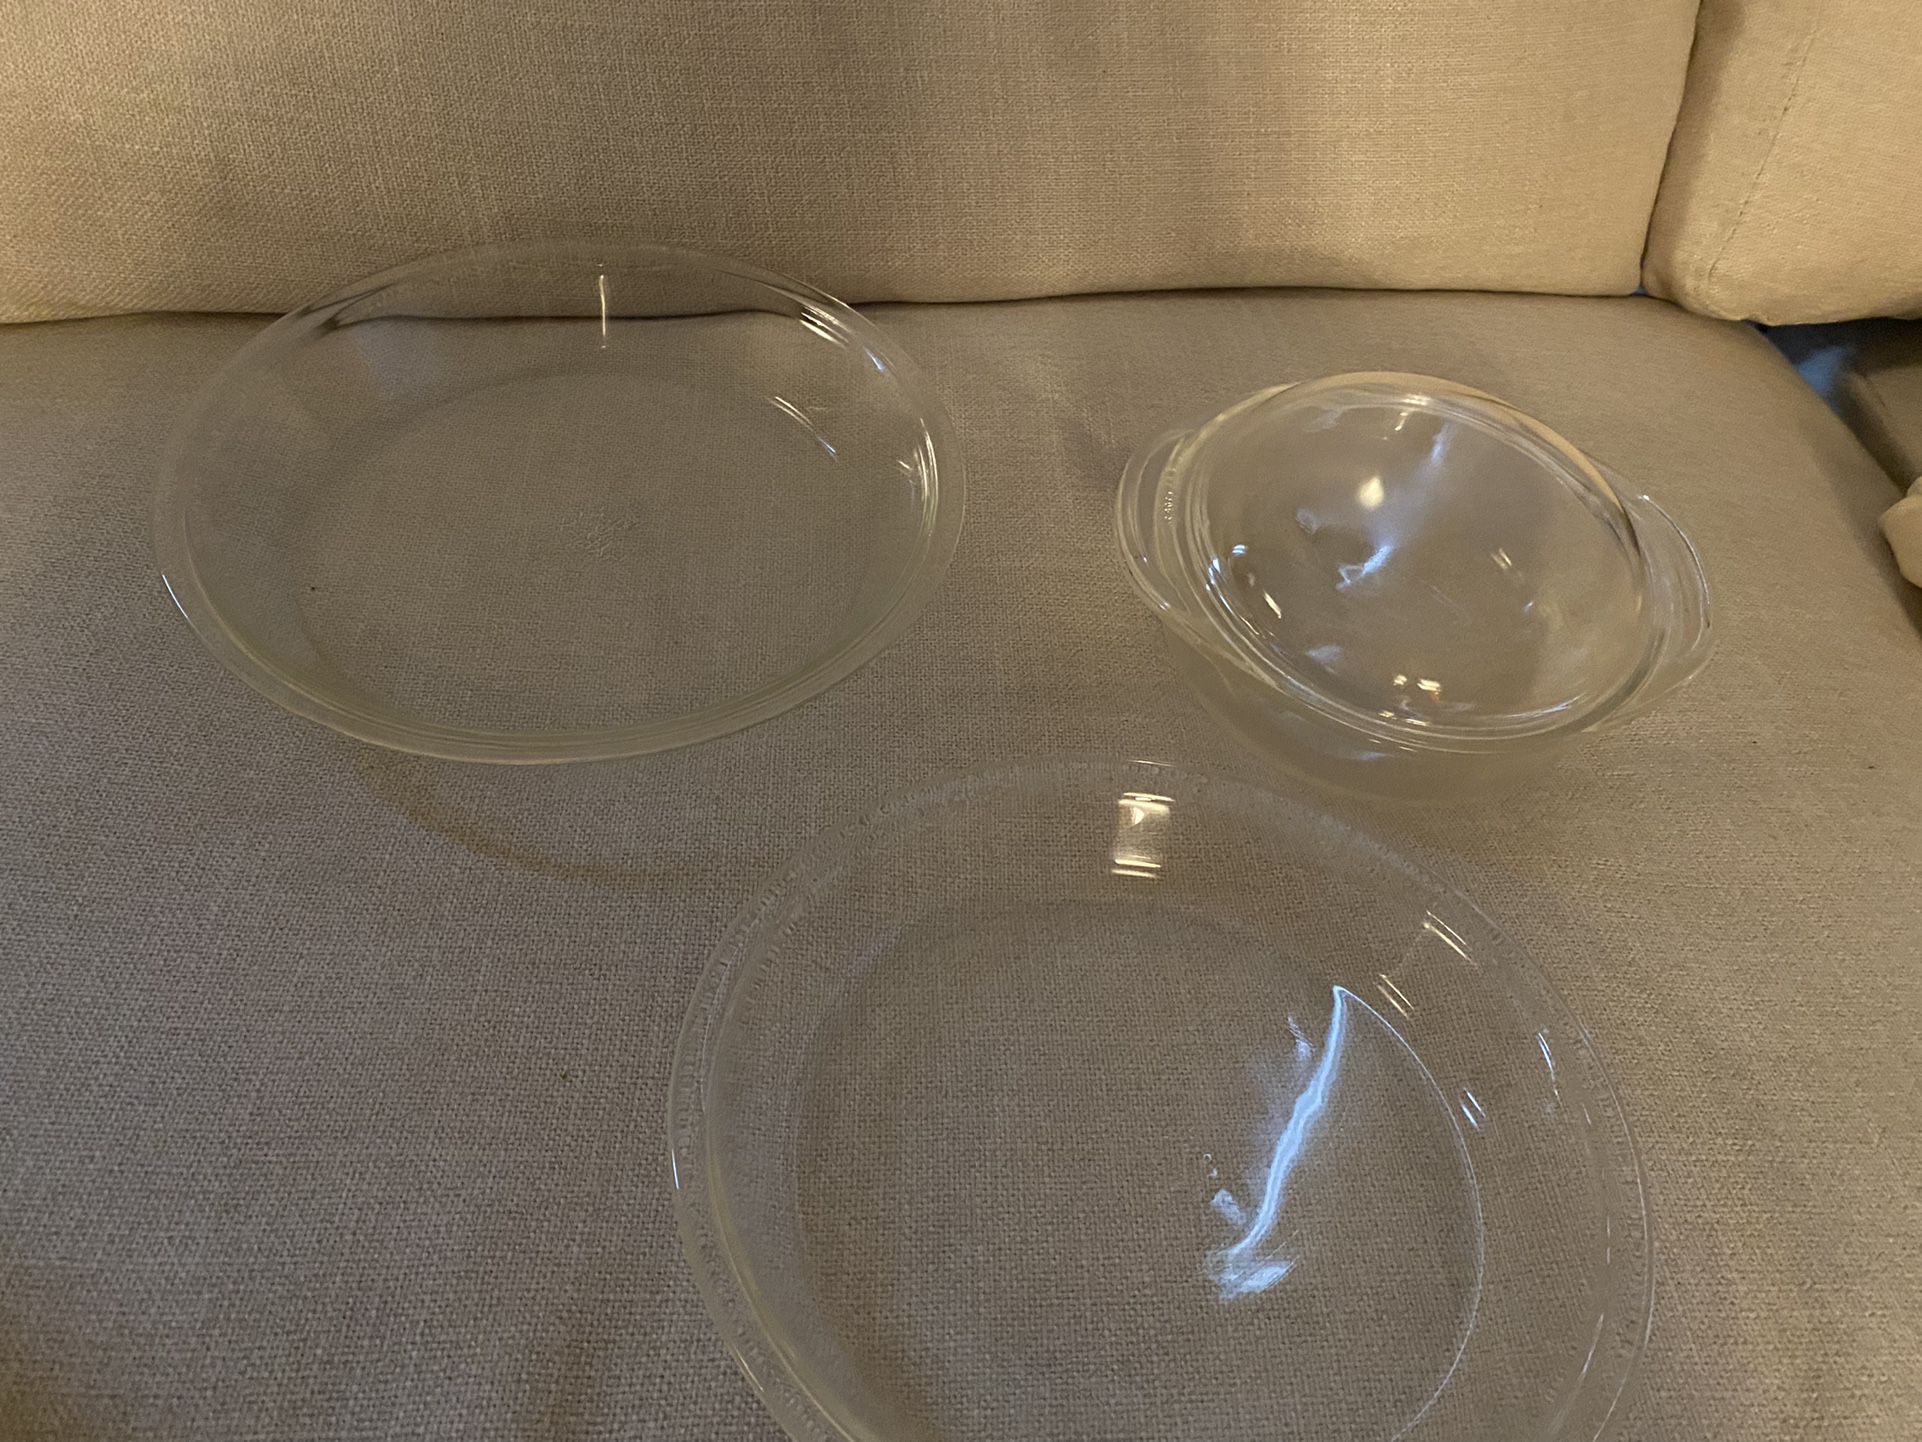 Pyrex Glass Dish Set- Microwave and Oven safe